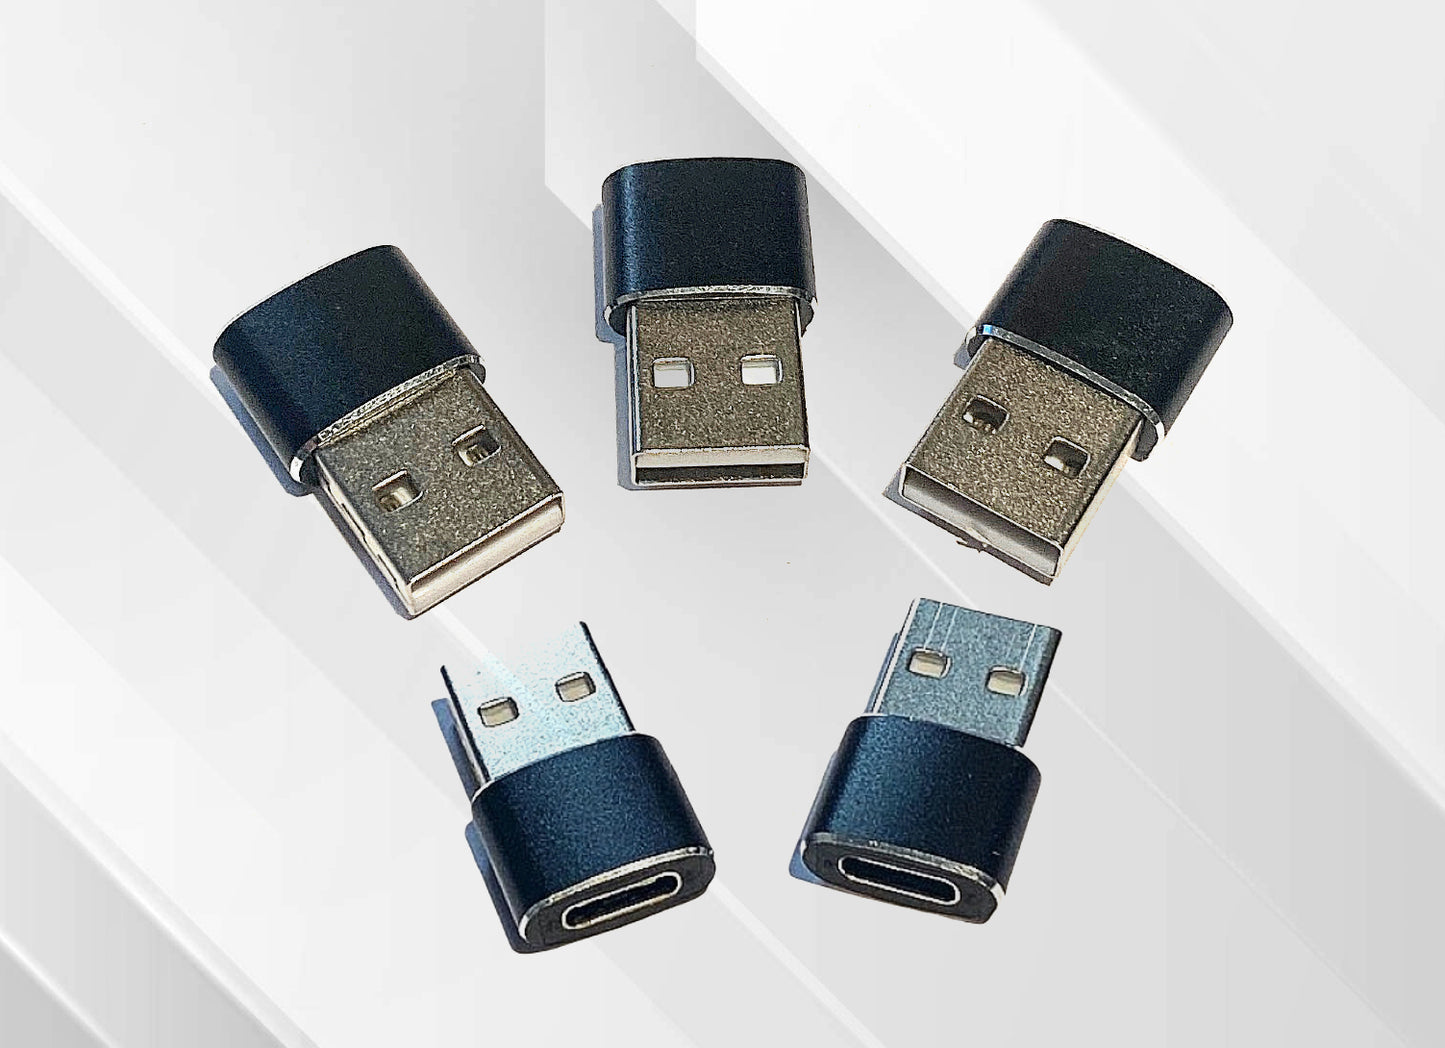 USB-C Female to USB Male Converter Adapter 5 Pack